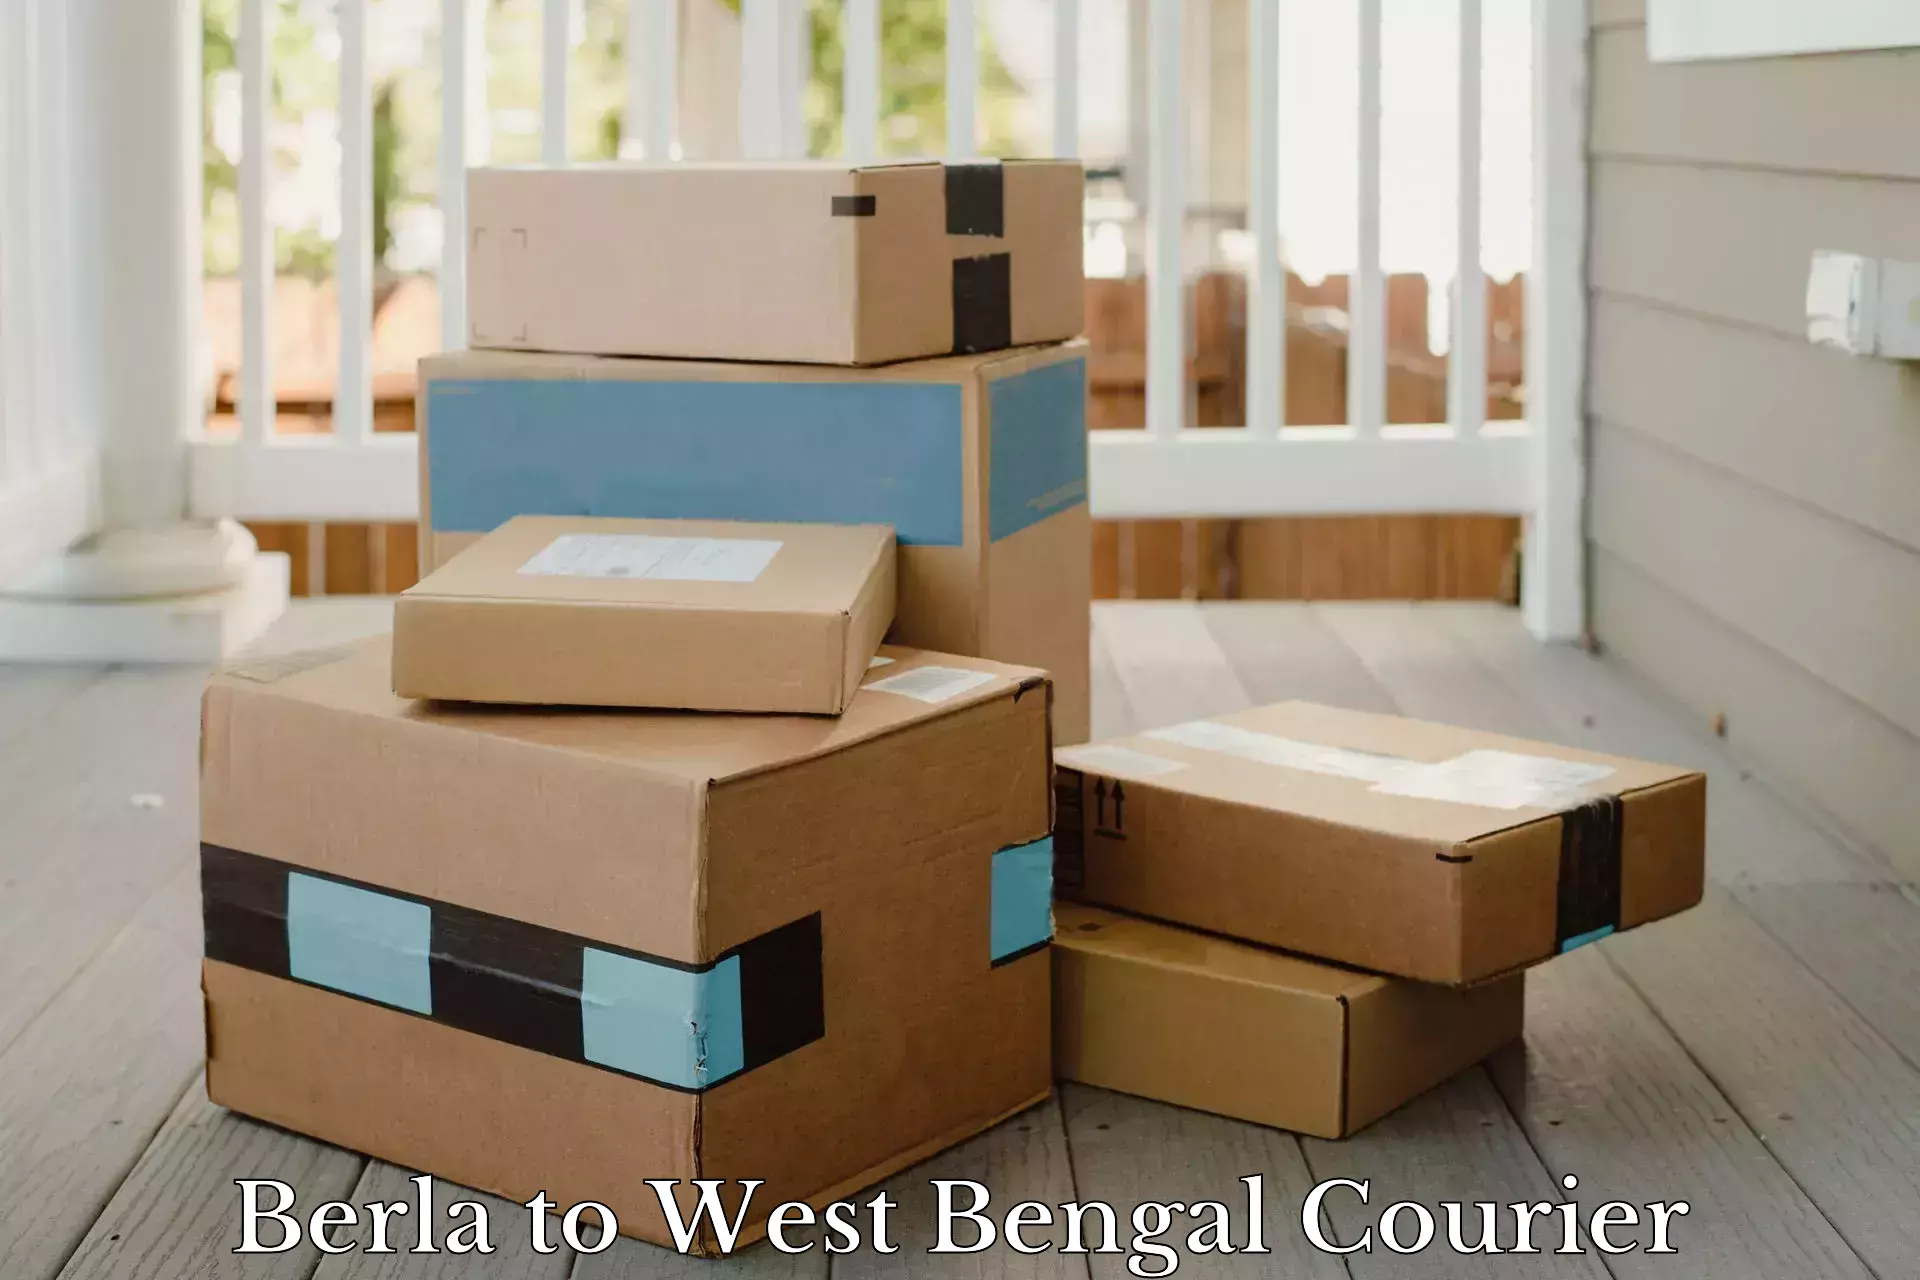 Courier service efficiency in Berla to West Bengal